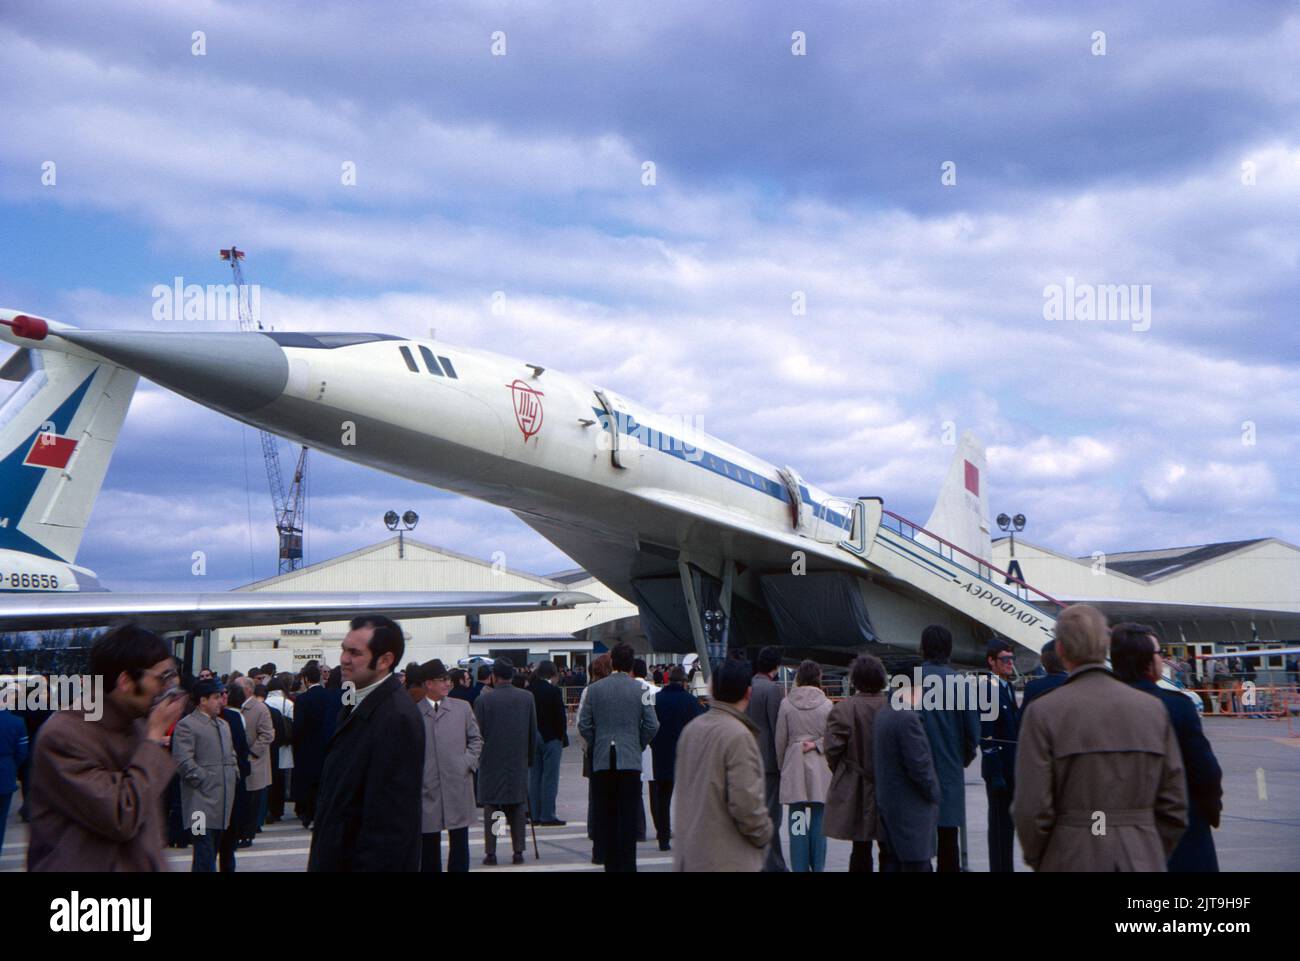 Tupolev Tu-144 Russian supersonic airliner 'Concordeski' at Paris Air Show 30 May 1973. Four days later it crashed during a display. Stock Photo